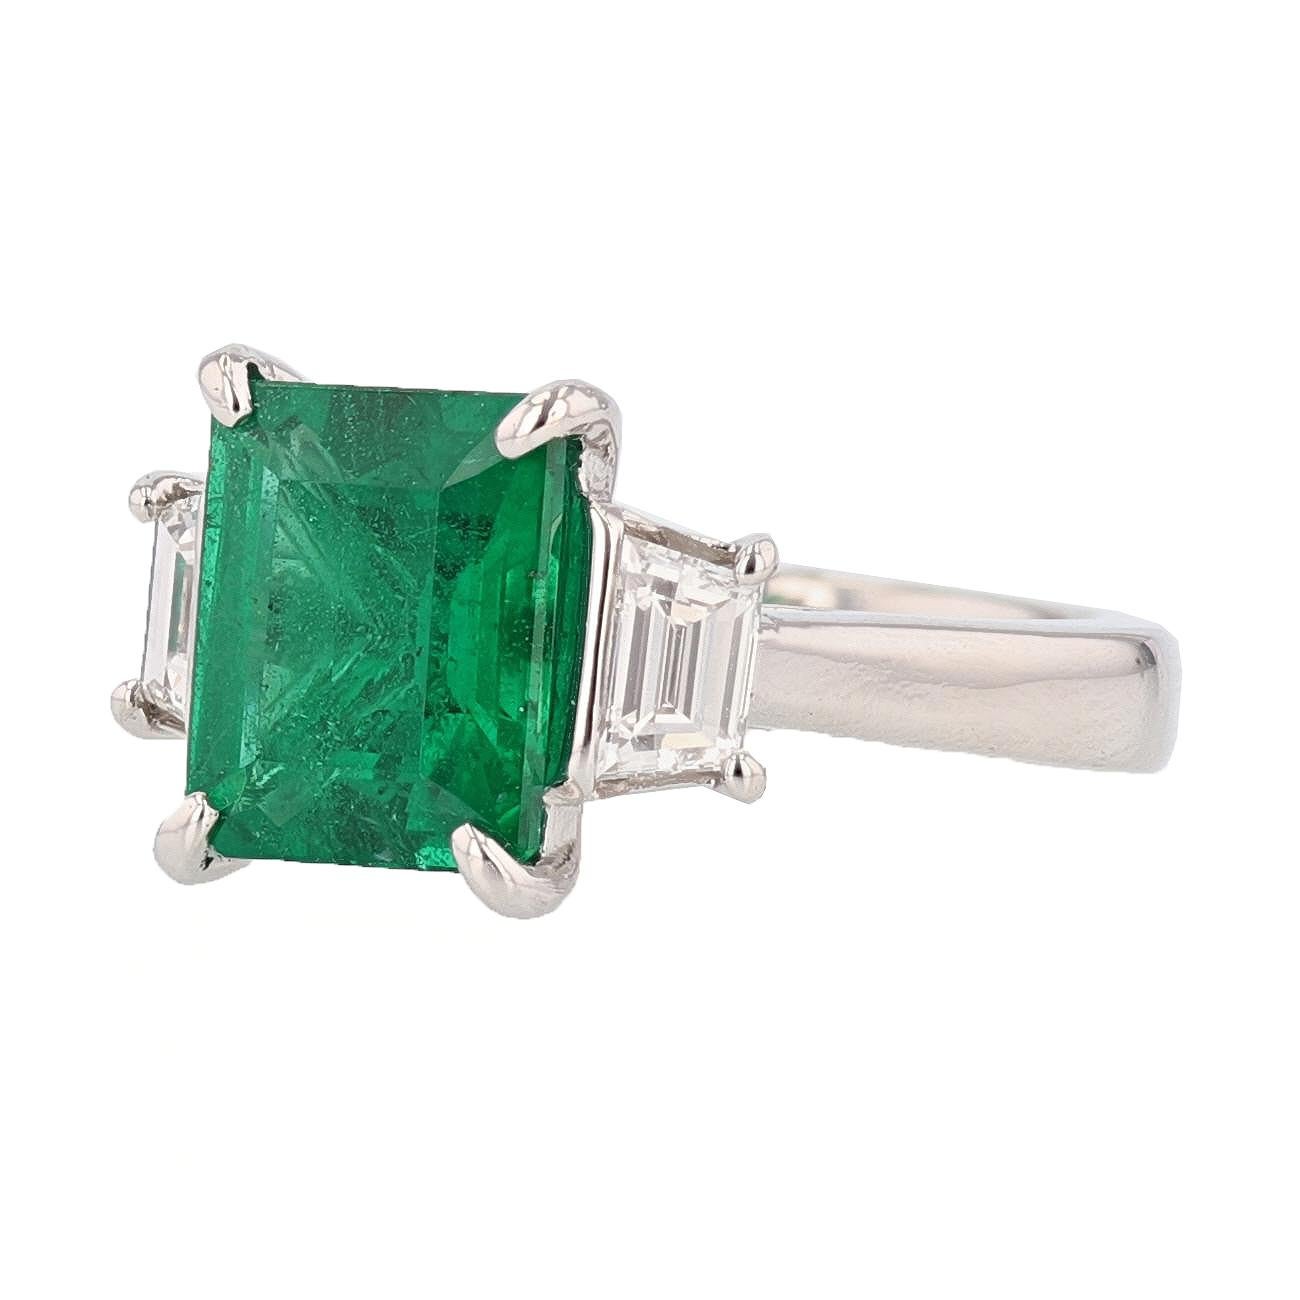 This ring is designed by Nazarelle and made in Platinum and features a 3.10ct Emerald Cut Natural Beryl Emerald (Treated) with a GIA certificate.  The GIA certificate number is 